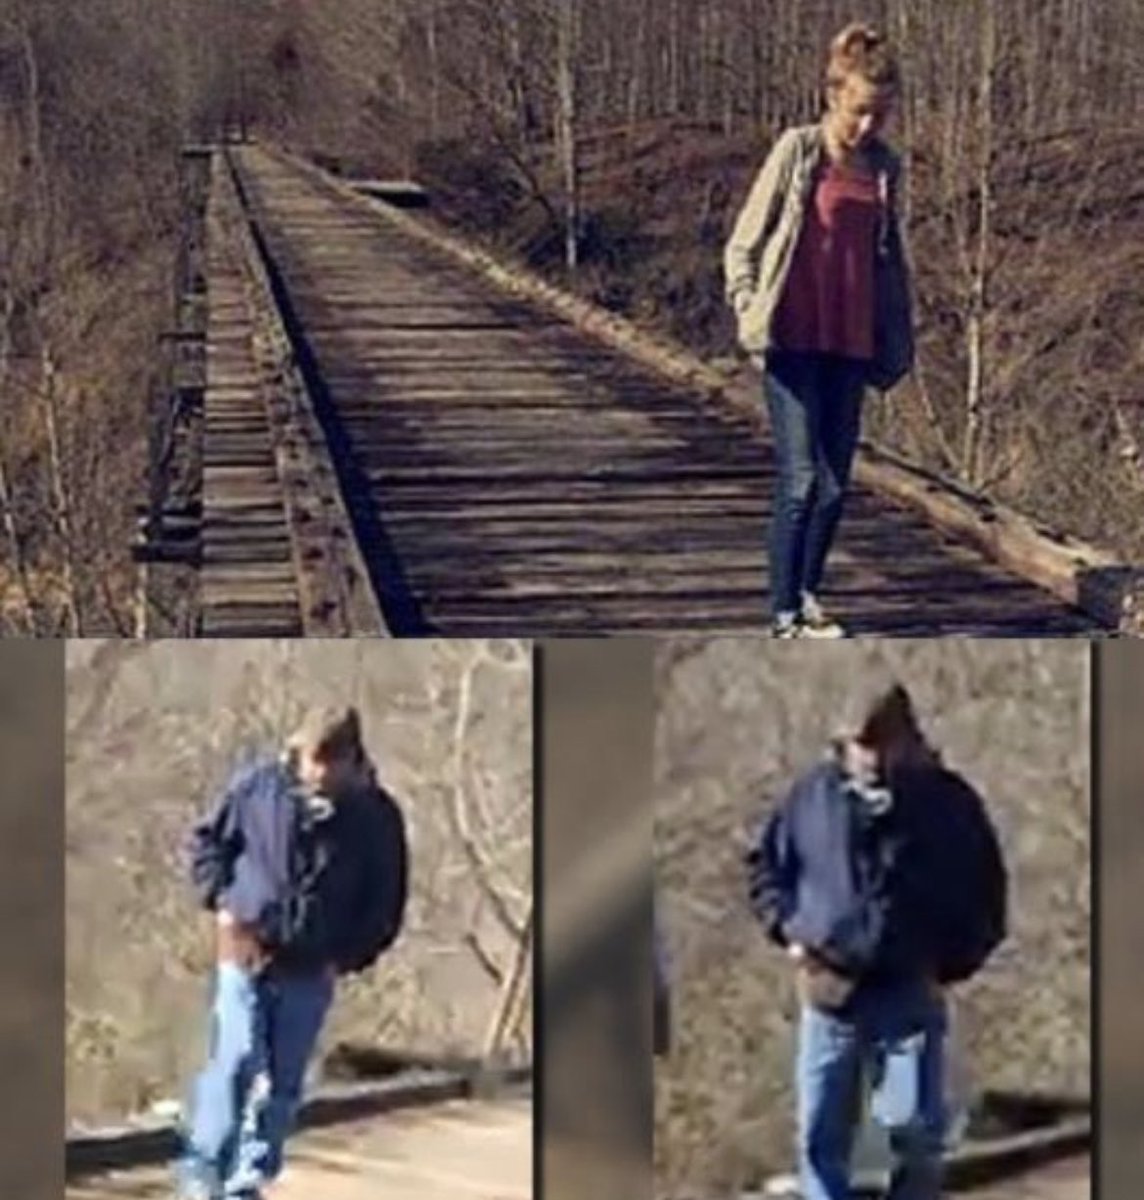 In 2016, 13-year-old Abigail Williams and her friend Libby German vanished while walking on a hiking trail in Delphi, Indiana. Tragically, their lifeless bodies were discovered the following day. 

Libby's phone contained the last known photo of Abby, along with images of an